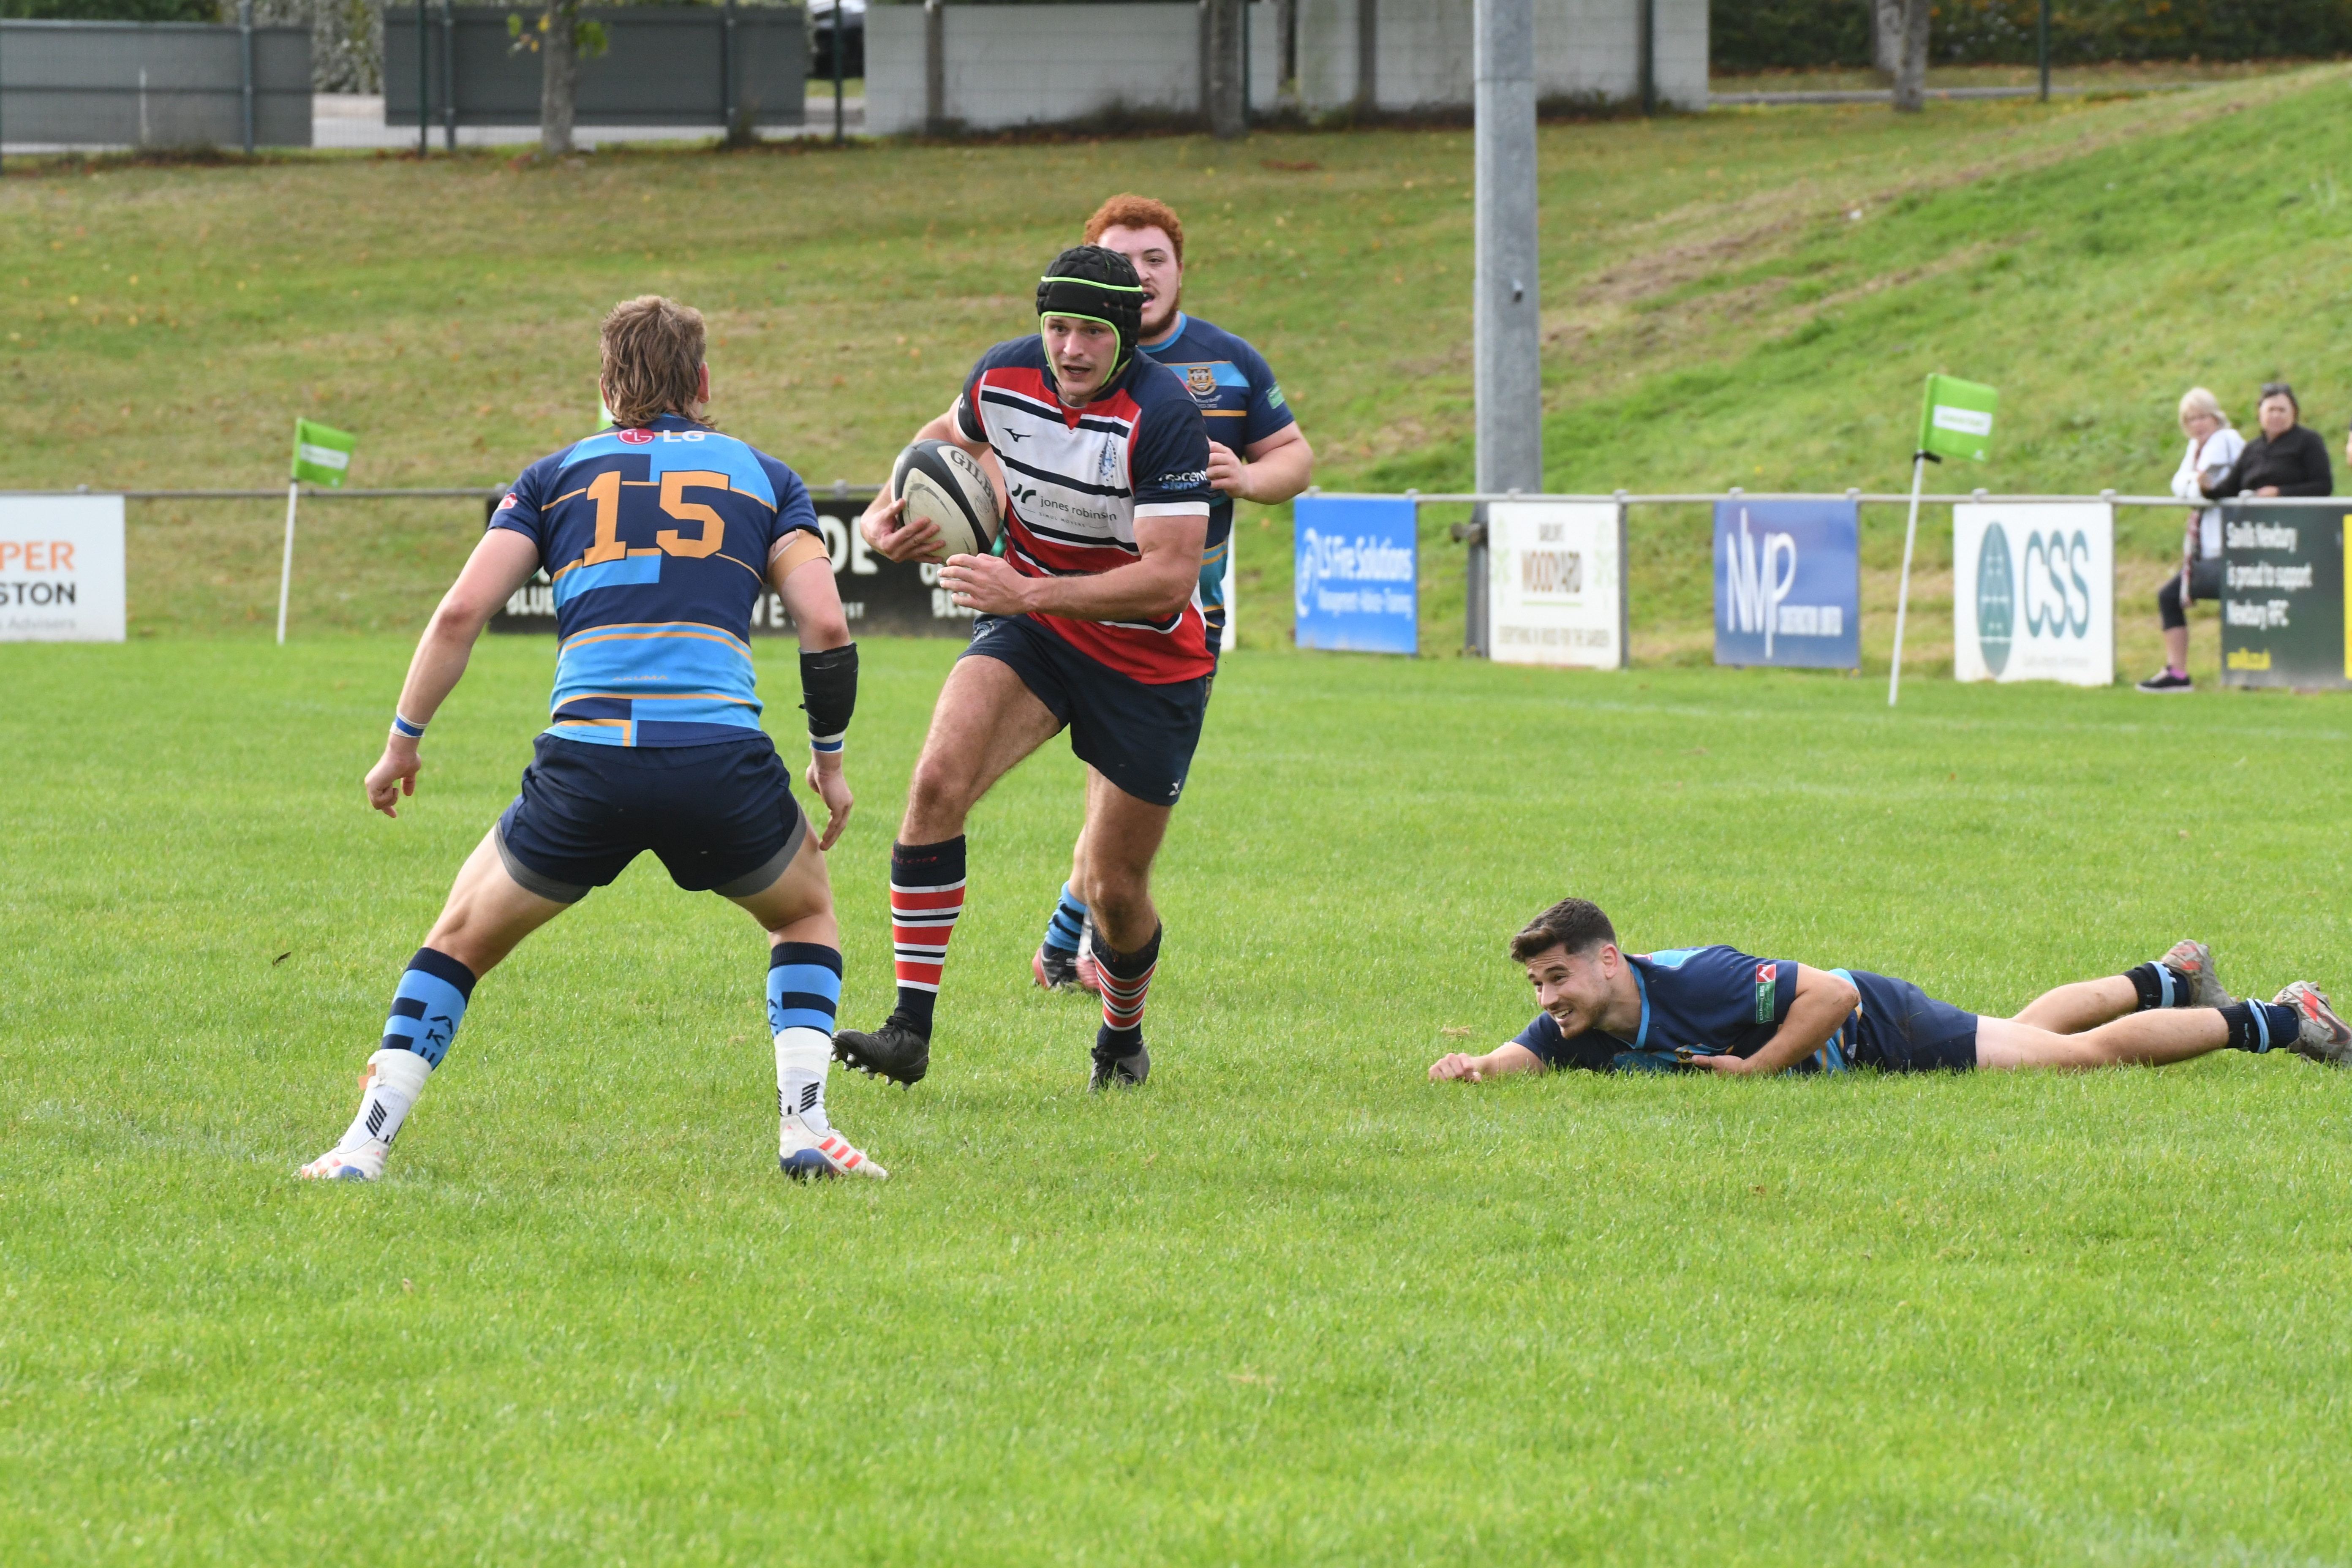 Newbury Blues trounced by Guildford